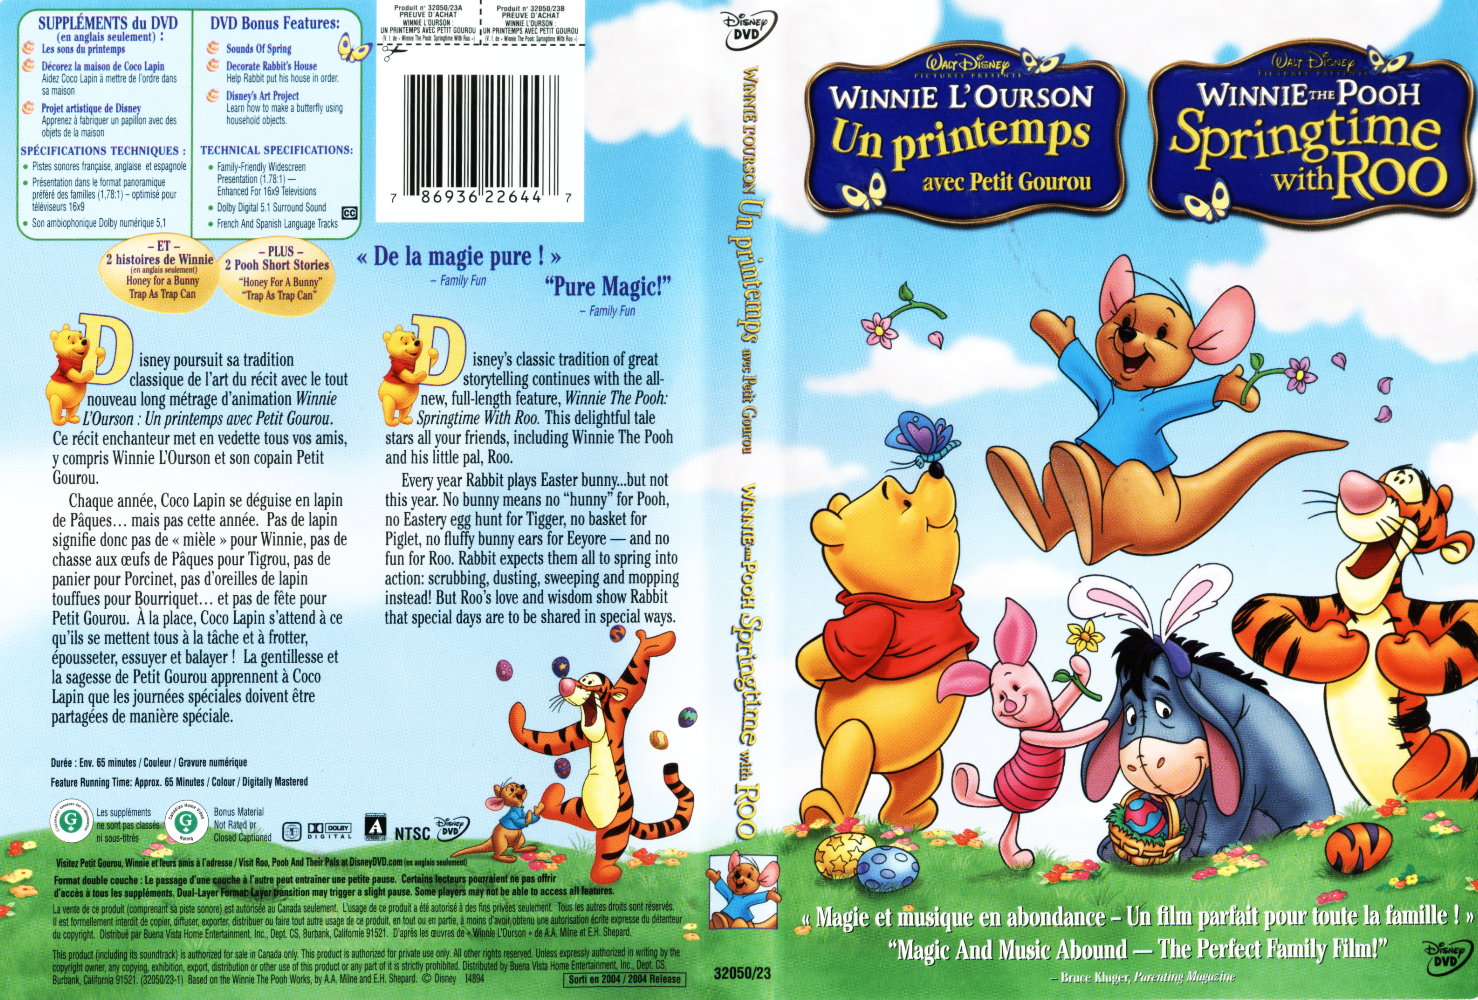 Jaquette DVD Winnie The Pooh Springtime with roo-front-texas